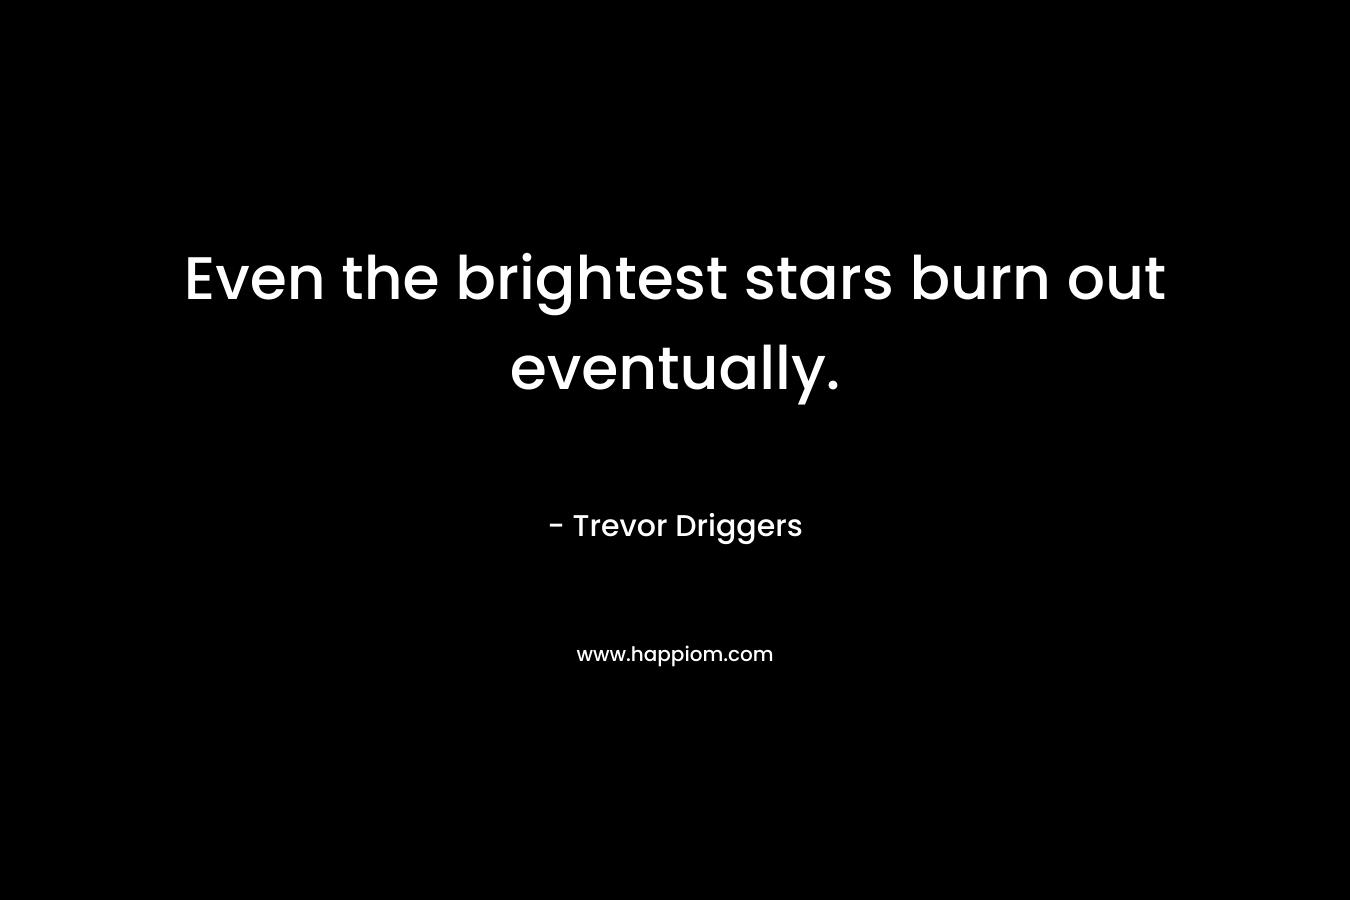 Even the brightest stars burn out eventually.